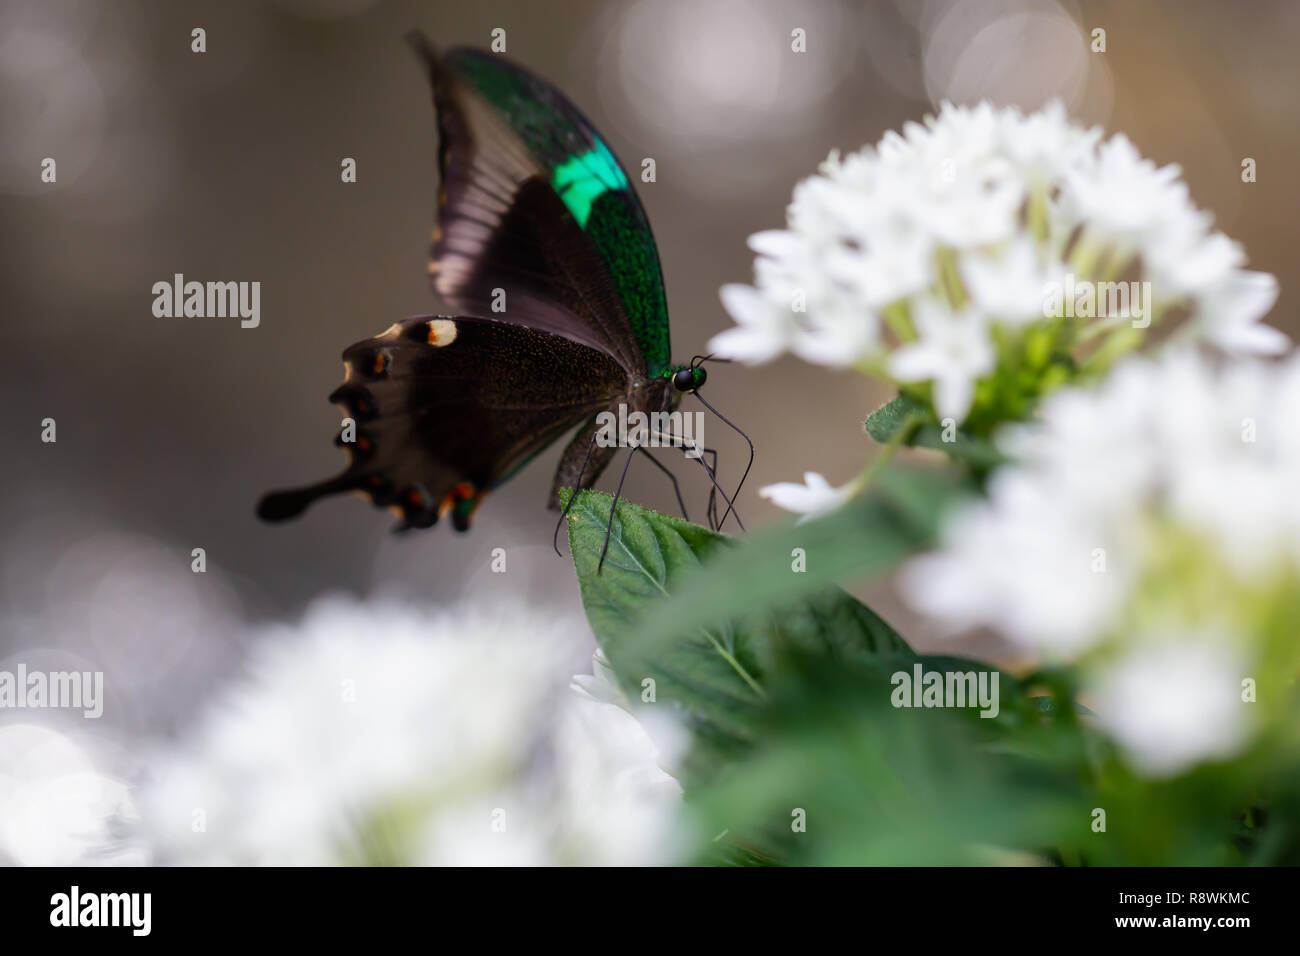 Beautiful macro picture of a butterfly,  Papilio palinurus, also known as Emerald Banded Peacock. Place of Origin is Indonesia, Southeast Asia. Stock Photo